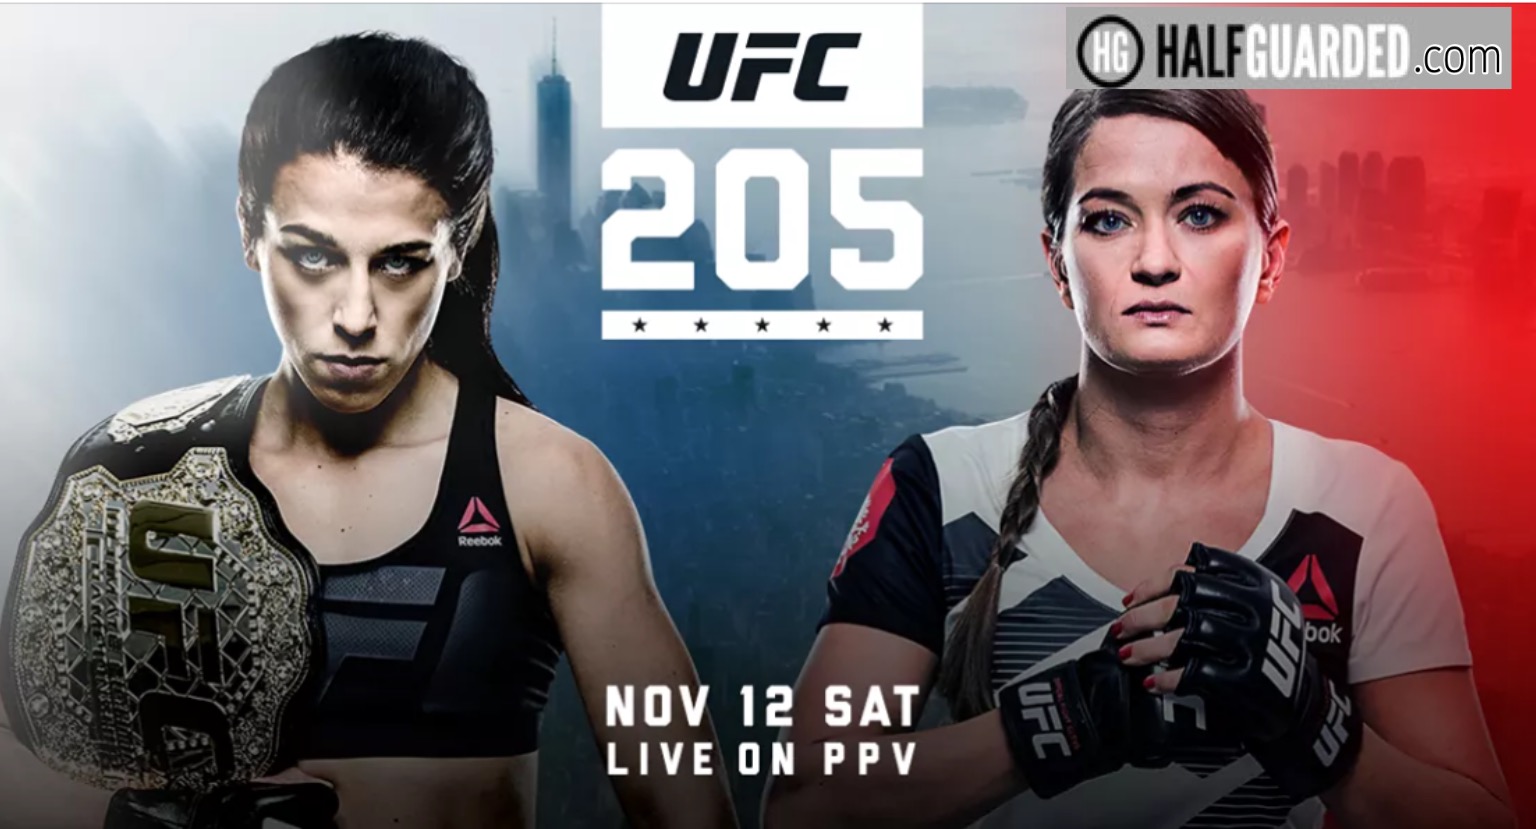 UFC 205 RESULTS - UFC 205 LIVE FREE STREAM of consciousness ONLINE - UFC MSG DEBUT Results - UFC New York Debut Results